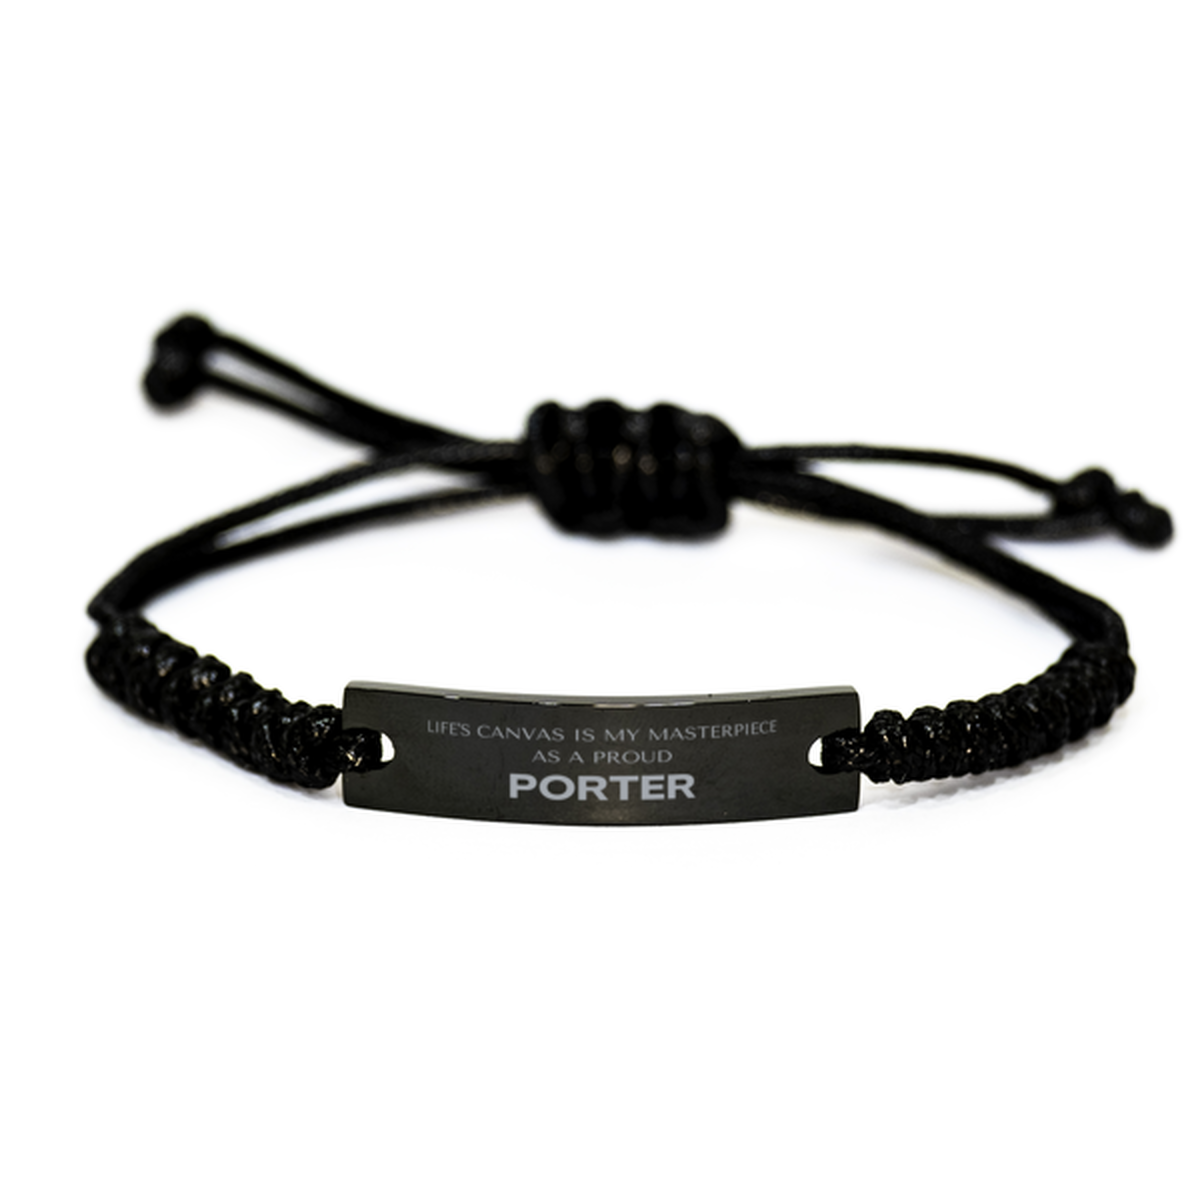 Proud Porter Gifts, Life's canvas is my masterpiece, Epic Birthday Christmas Unique Black Rope Bracelet For Porter, Coworkers, Men, Women, Friends